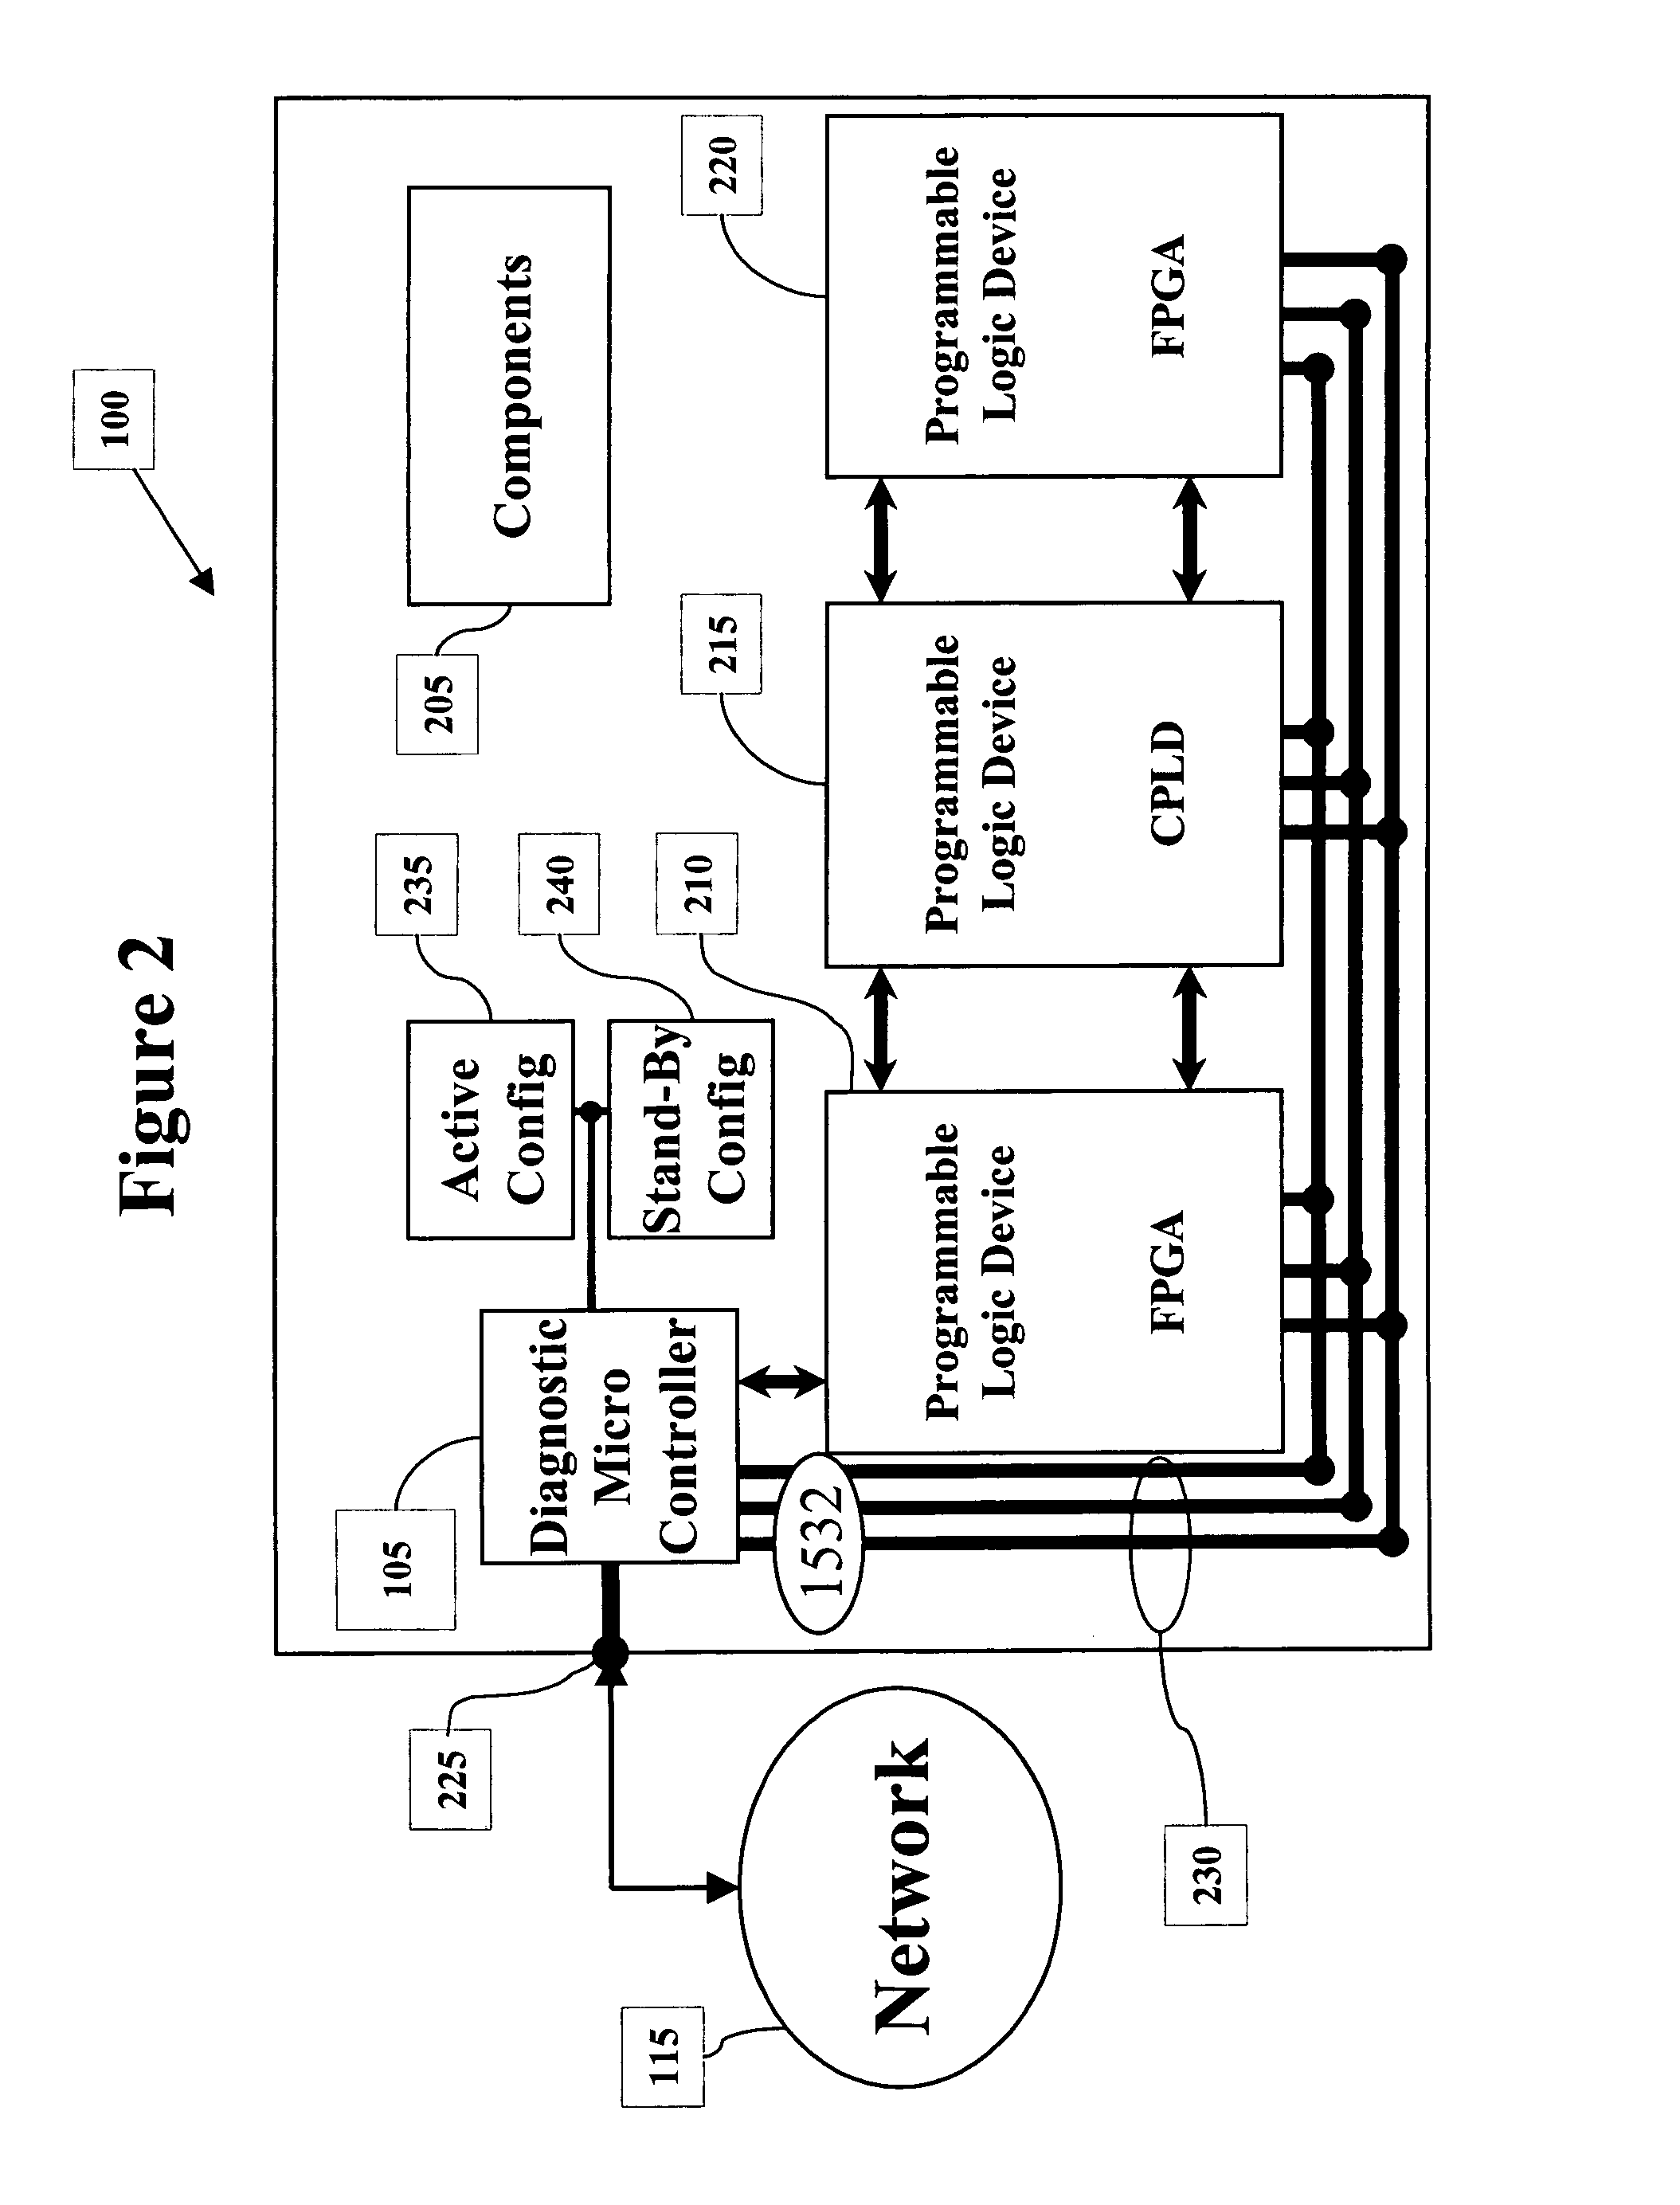 Network based diagnostic system and method for programmable hardware